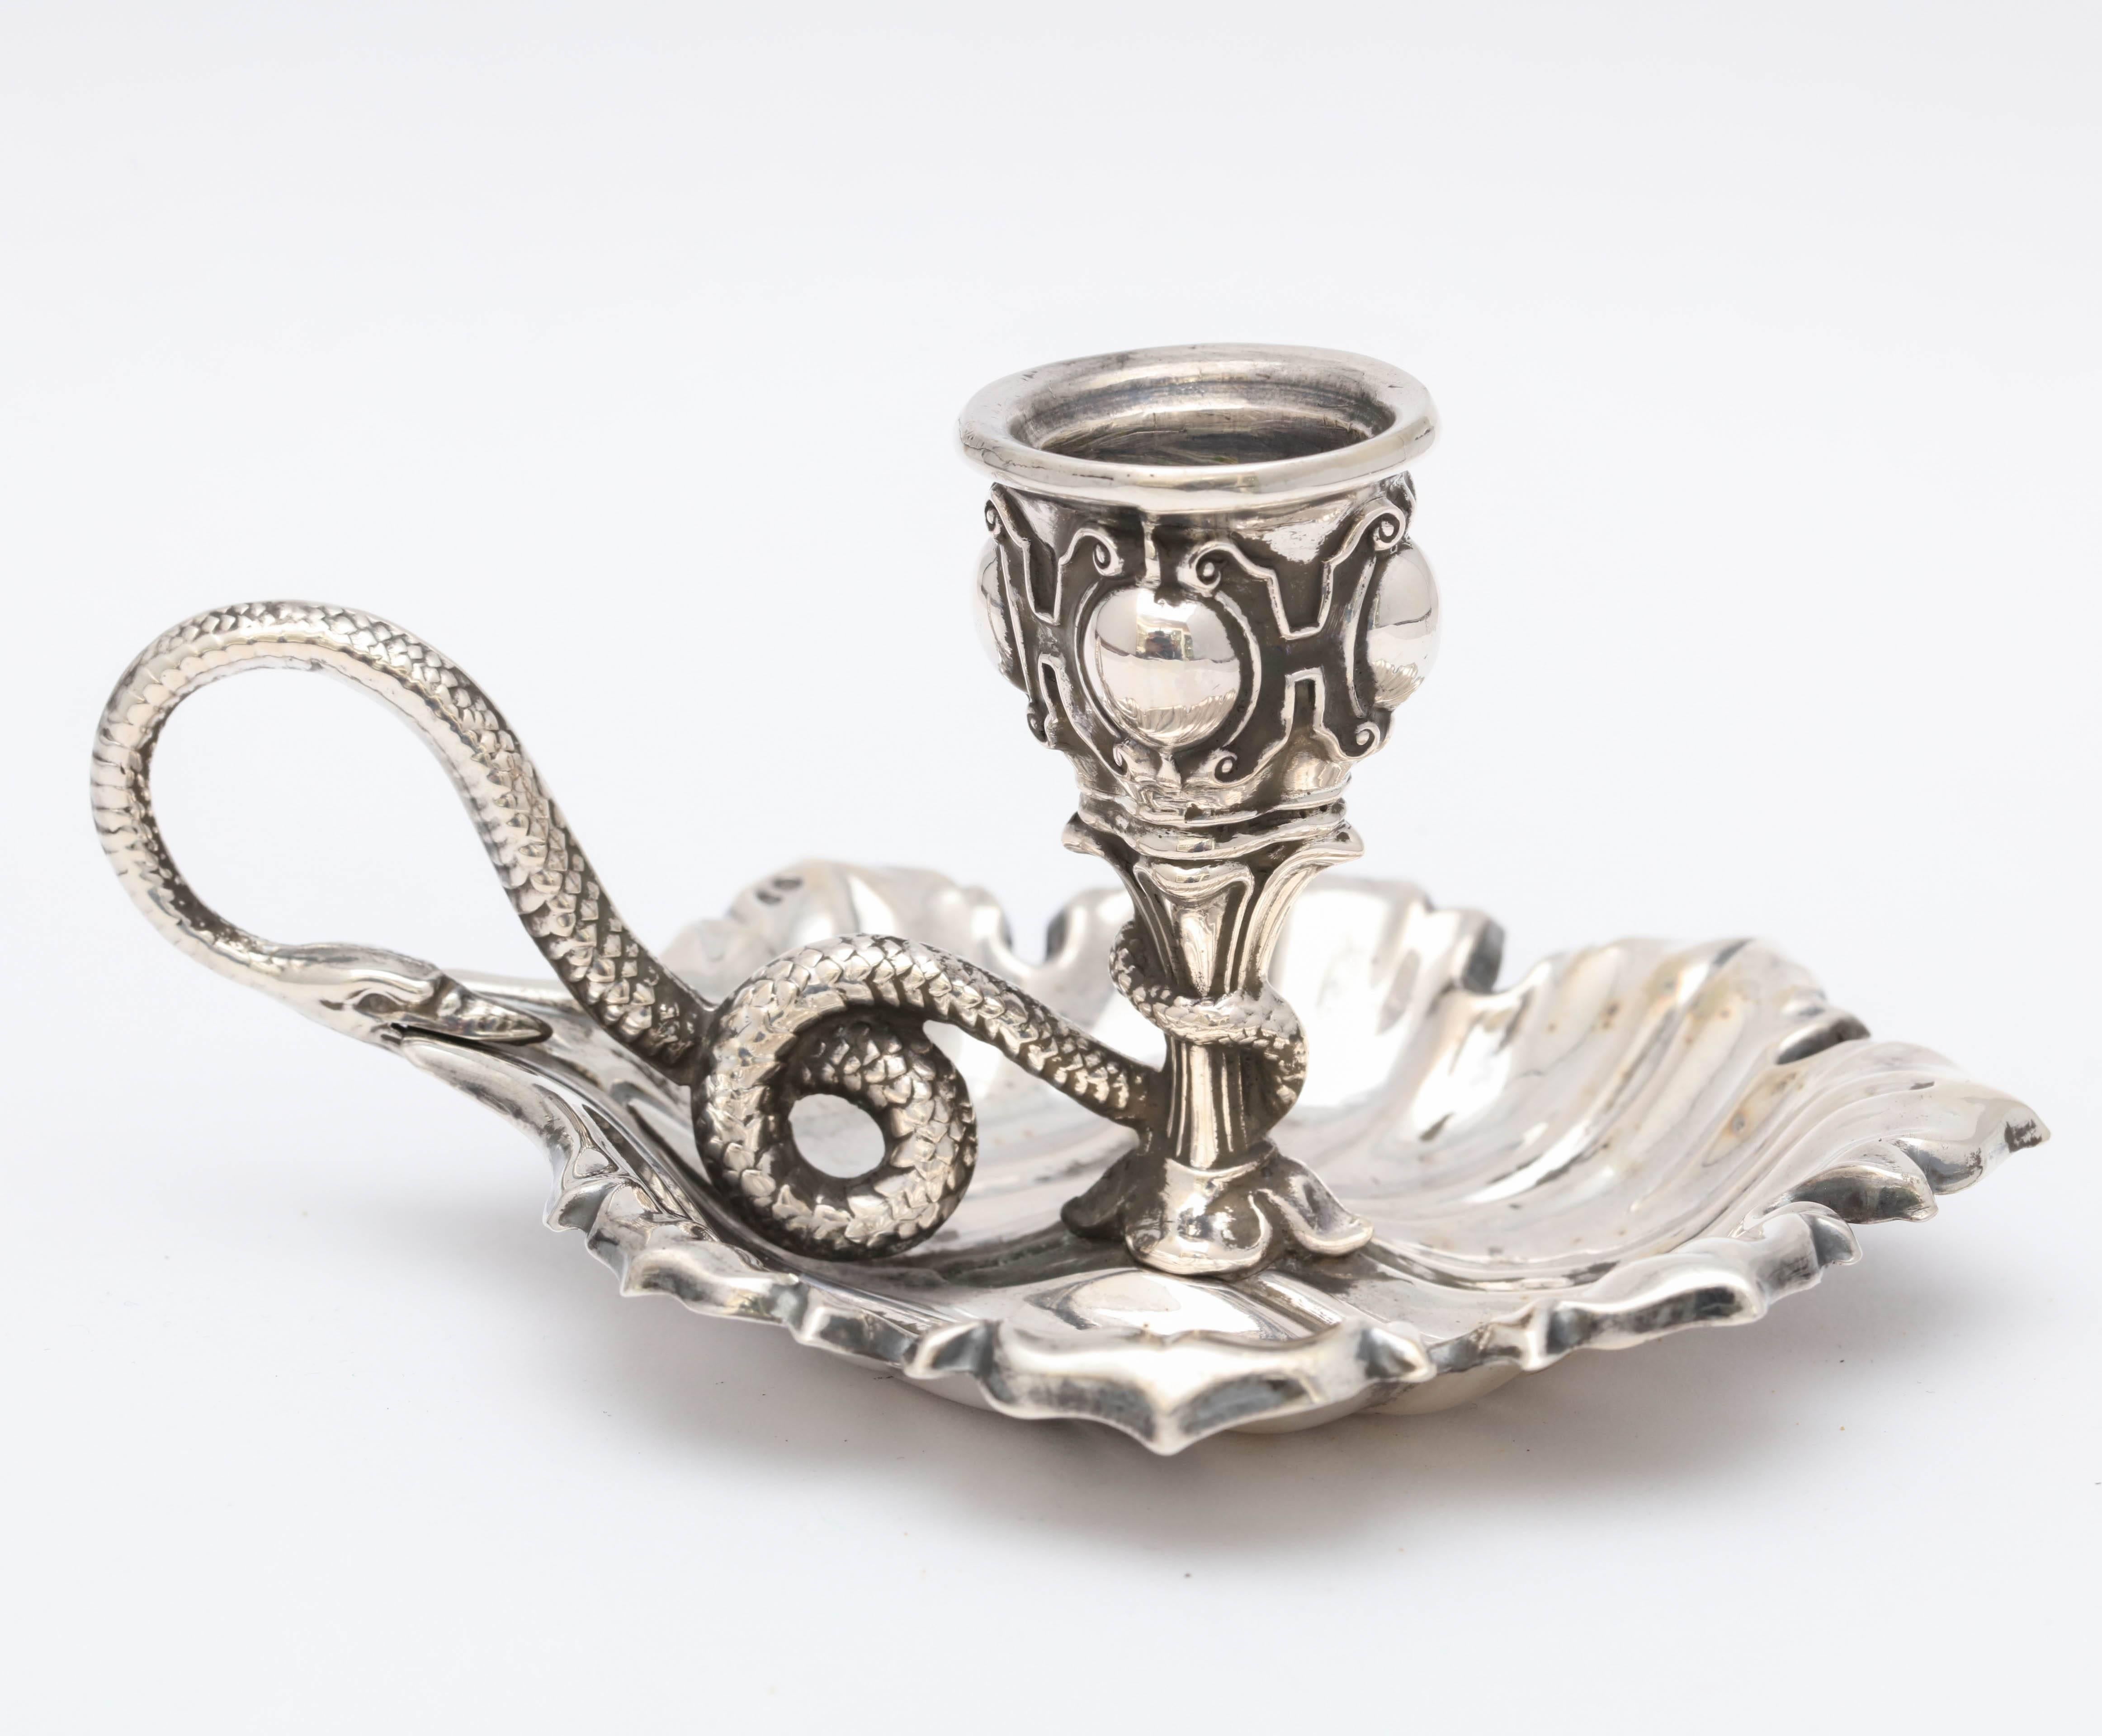 Lovely, Victorian, Continental Silver (.800) leaf-form chambersitck with snake handle, Austria, circa 1890s. Beautiful detail. Measure: A little over 3 3/4 inches deep x 4 1/2 inches wide (from edge of leaf to edge of snake handle) x just under 2